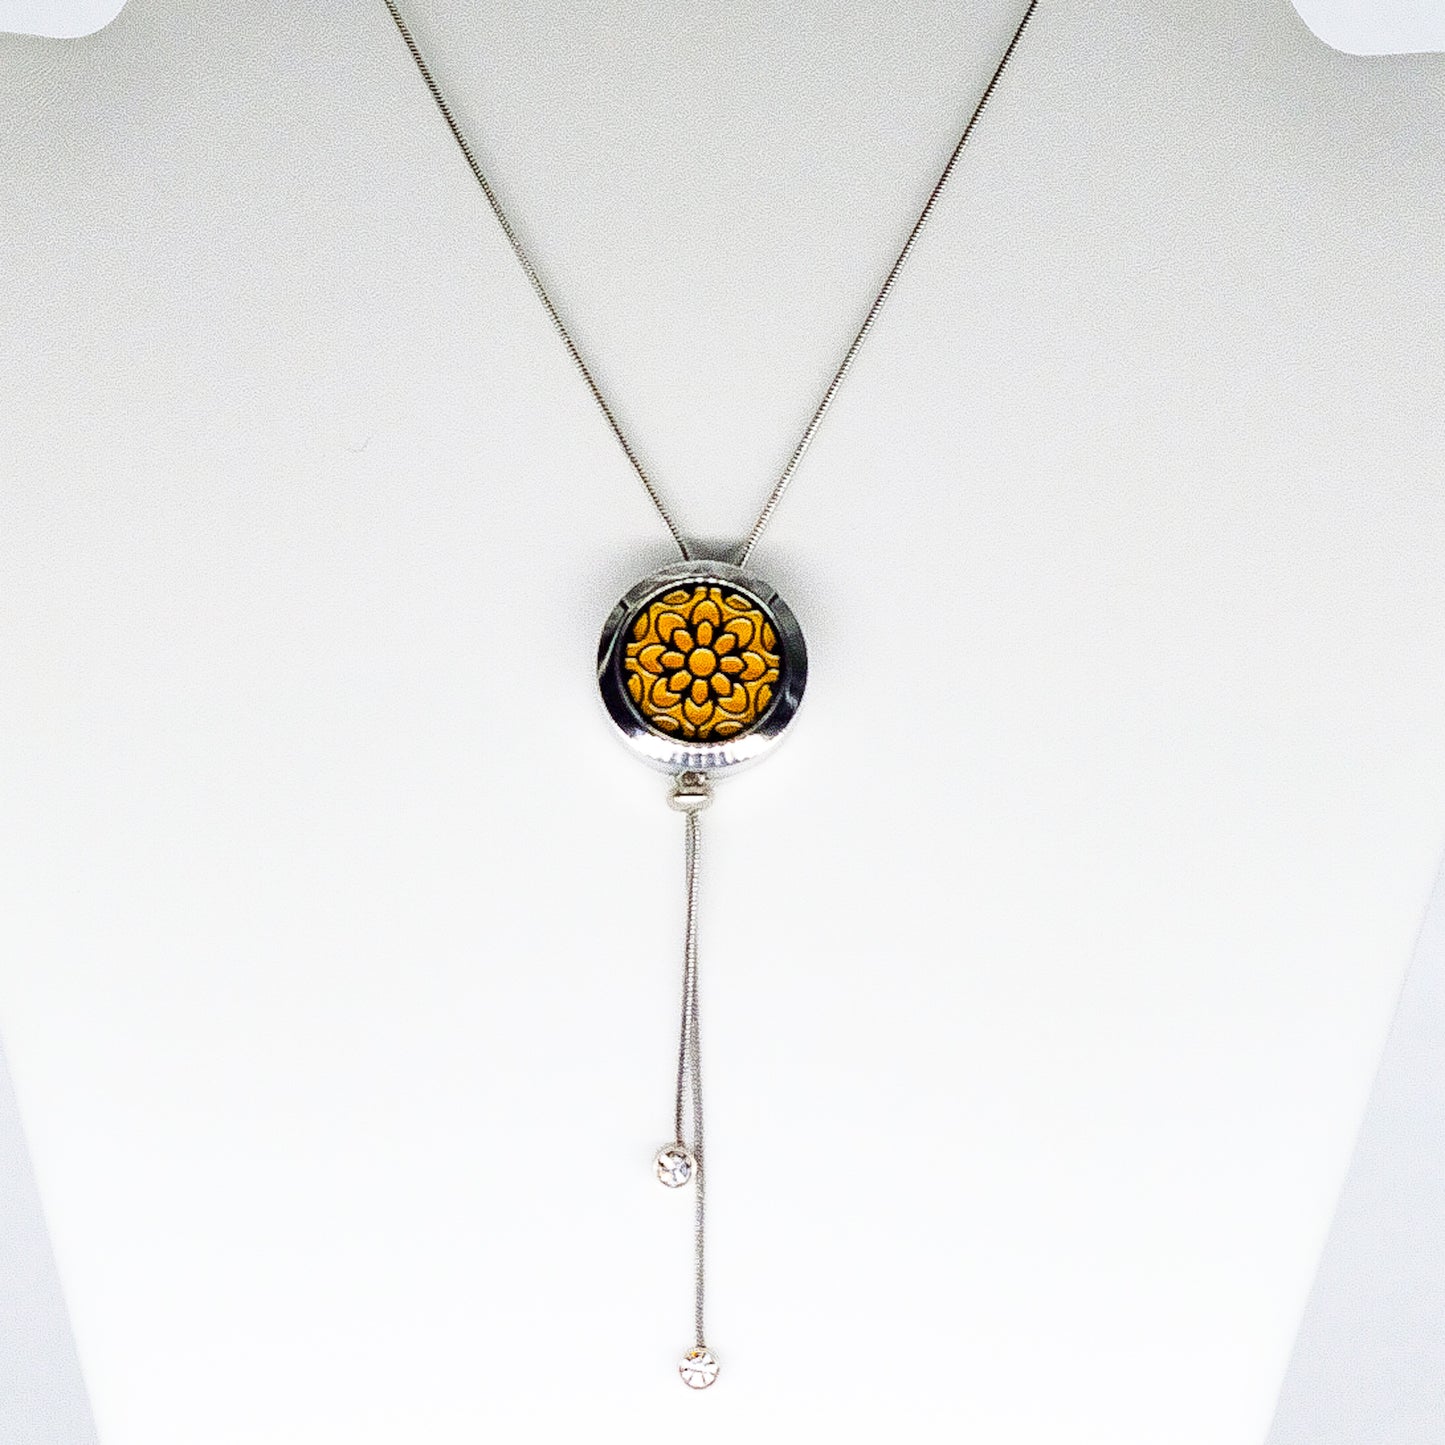 Round stainless steel aromatherapy necklace with a long chain 